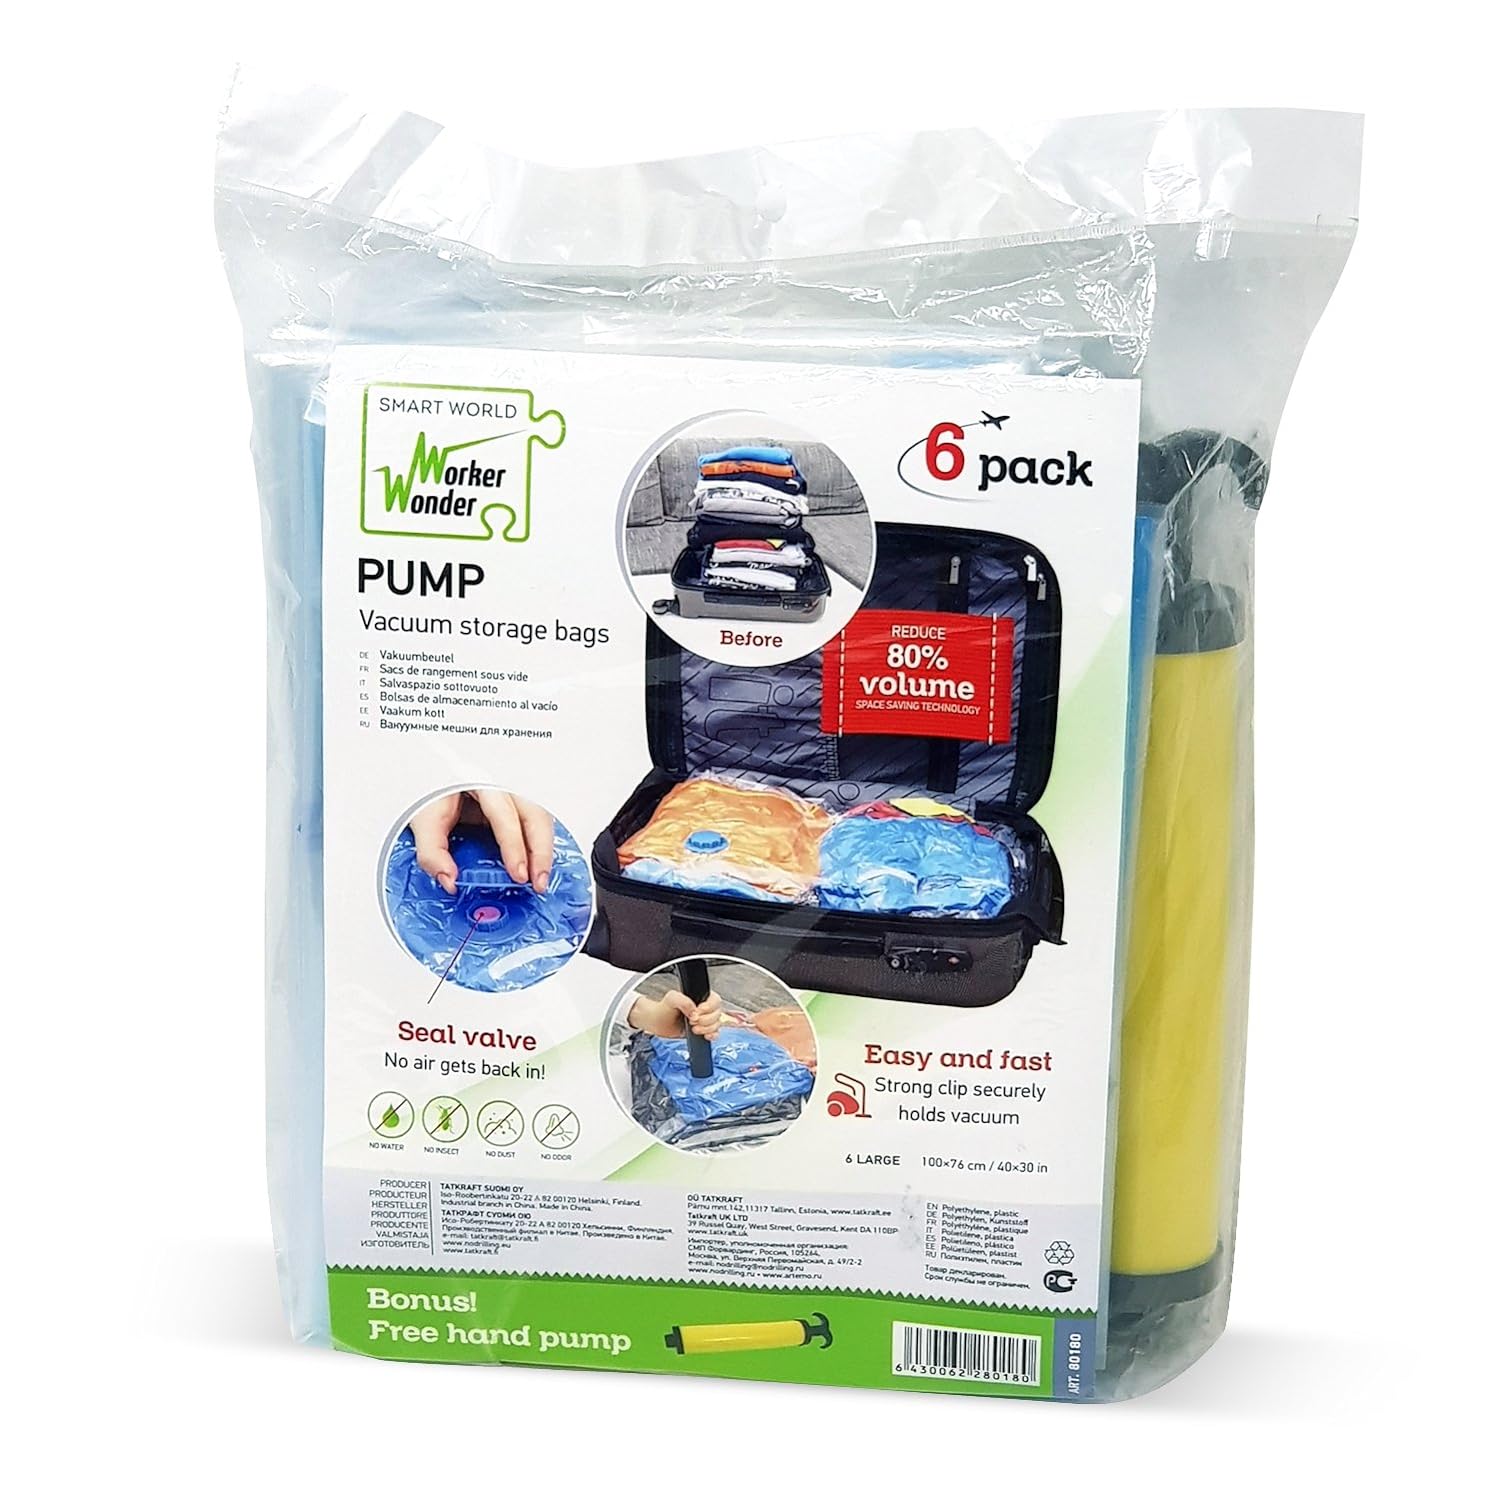 WonderWorker Pump, 6 Jumbo Vacuum Storage Bags, Nearly 80% More Compression Than Other Brands, Storage Bags for bedding, pillow, blankets, clothes etc.